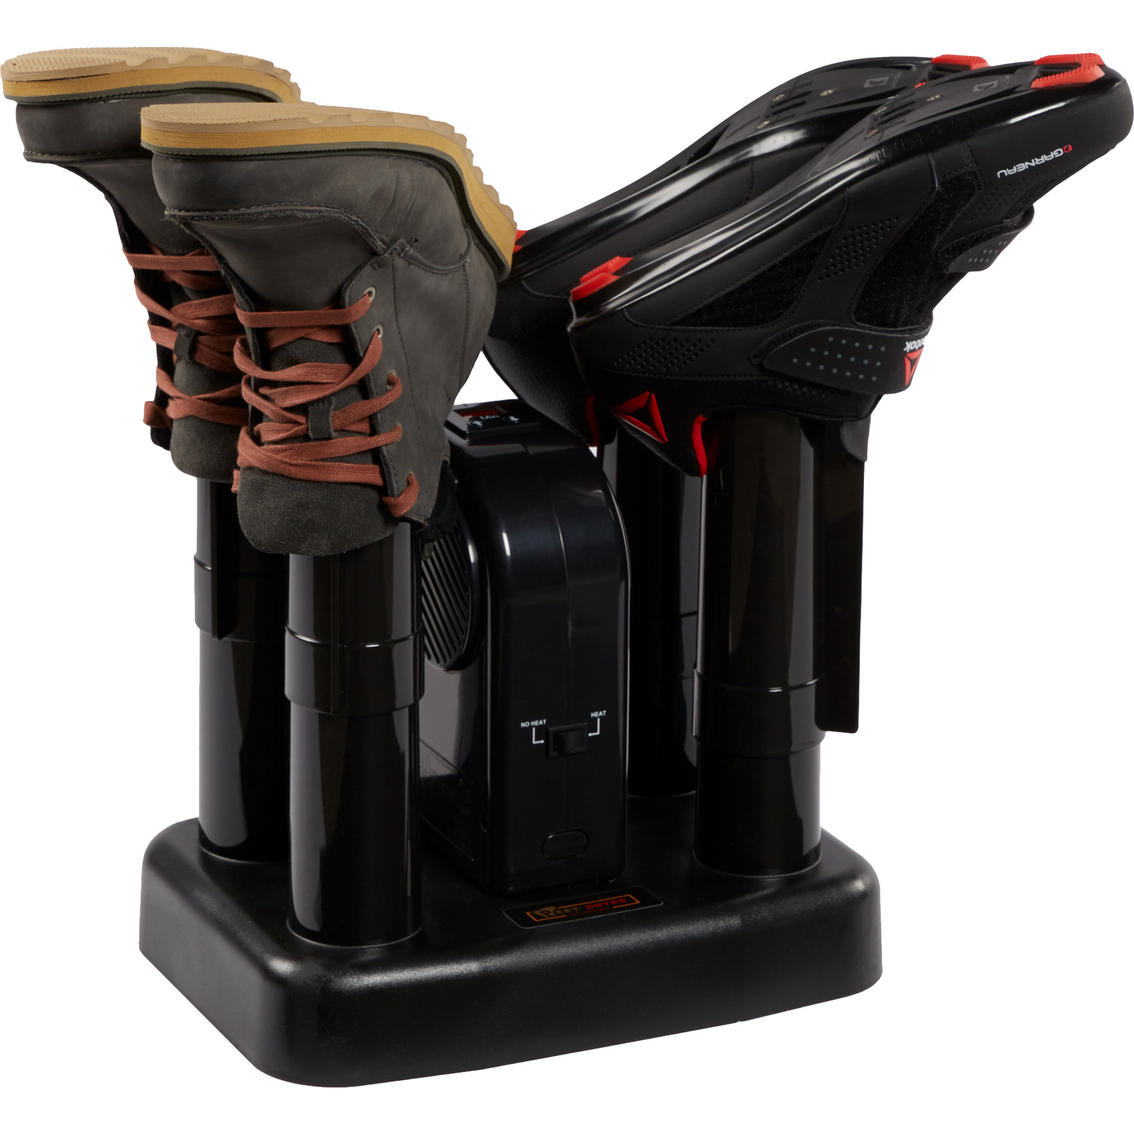 Peet Advantage Heated Shoe and Boot Dryer - Image 4 of 5